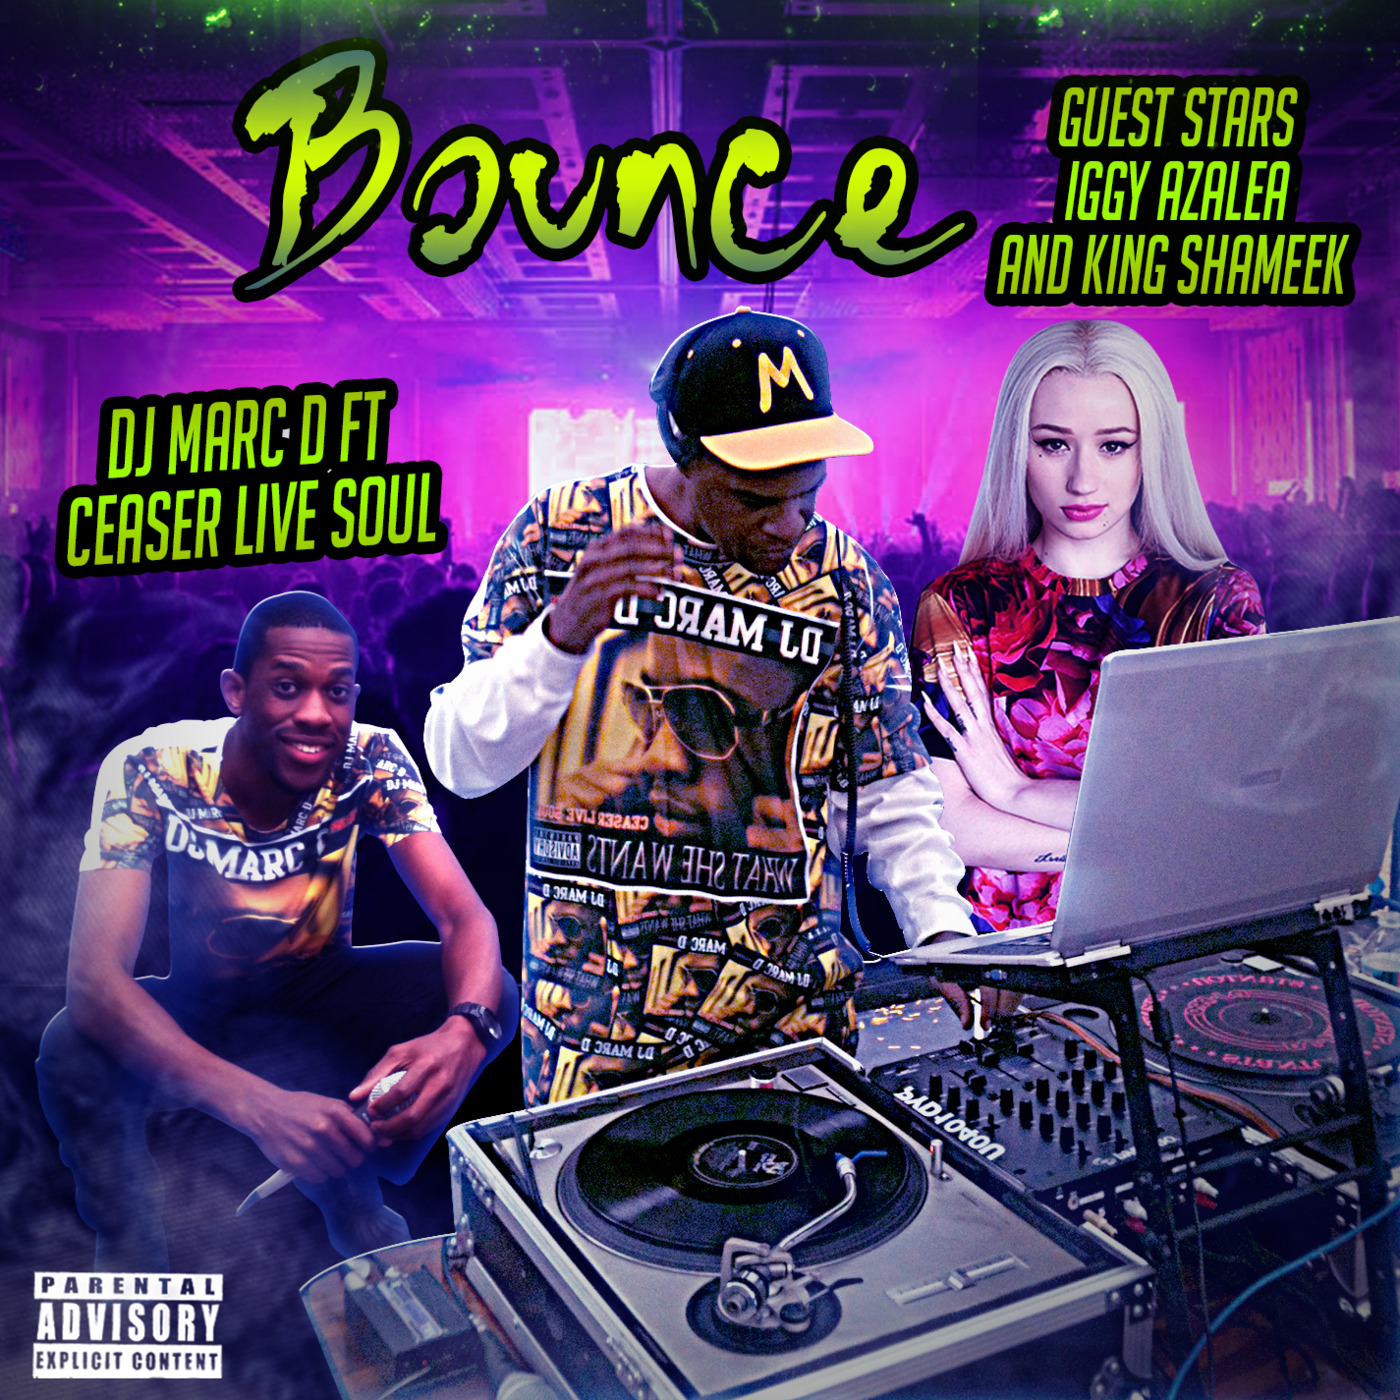 @Djmarcd Ft @Ceaserlivesoul - Bounce #InTheMix And Iggy Azalea and King Shameek